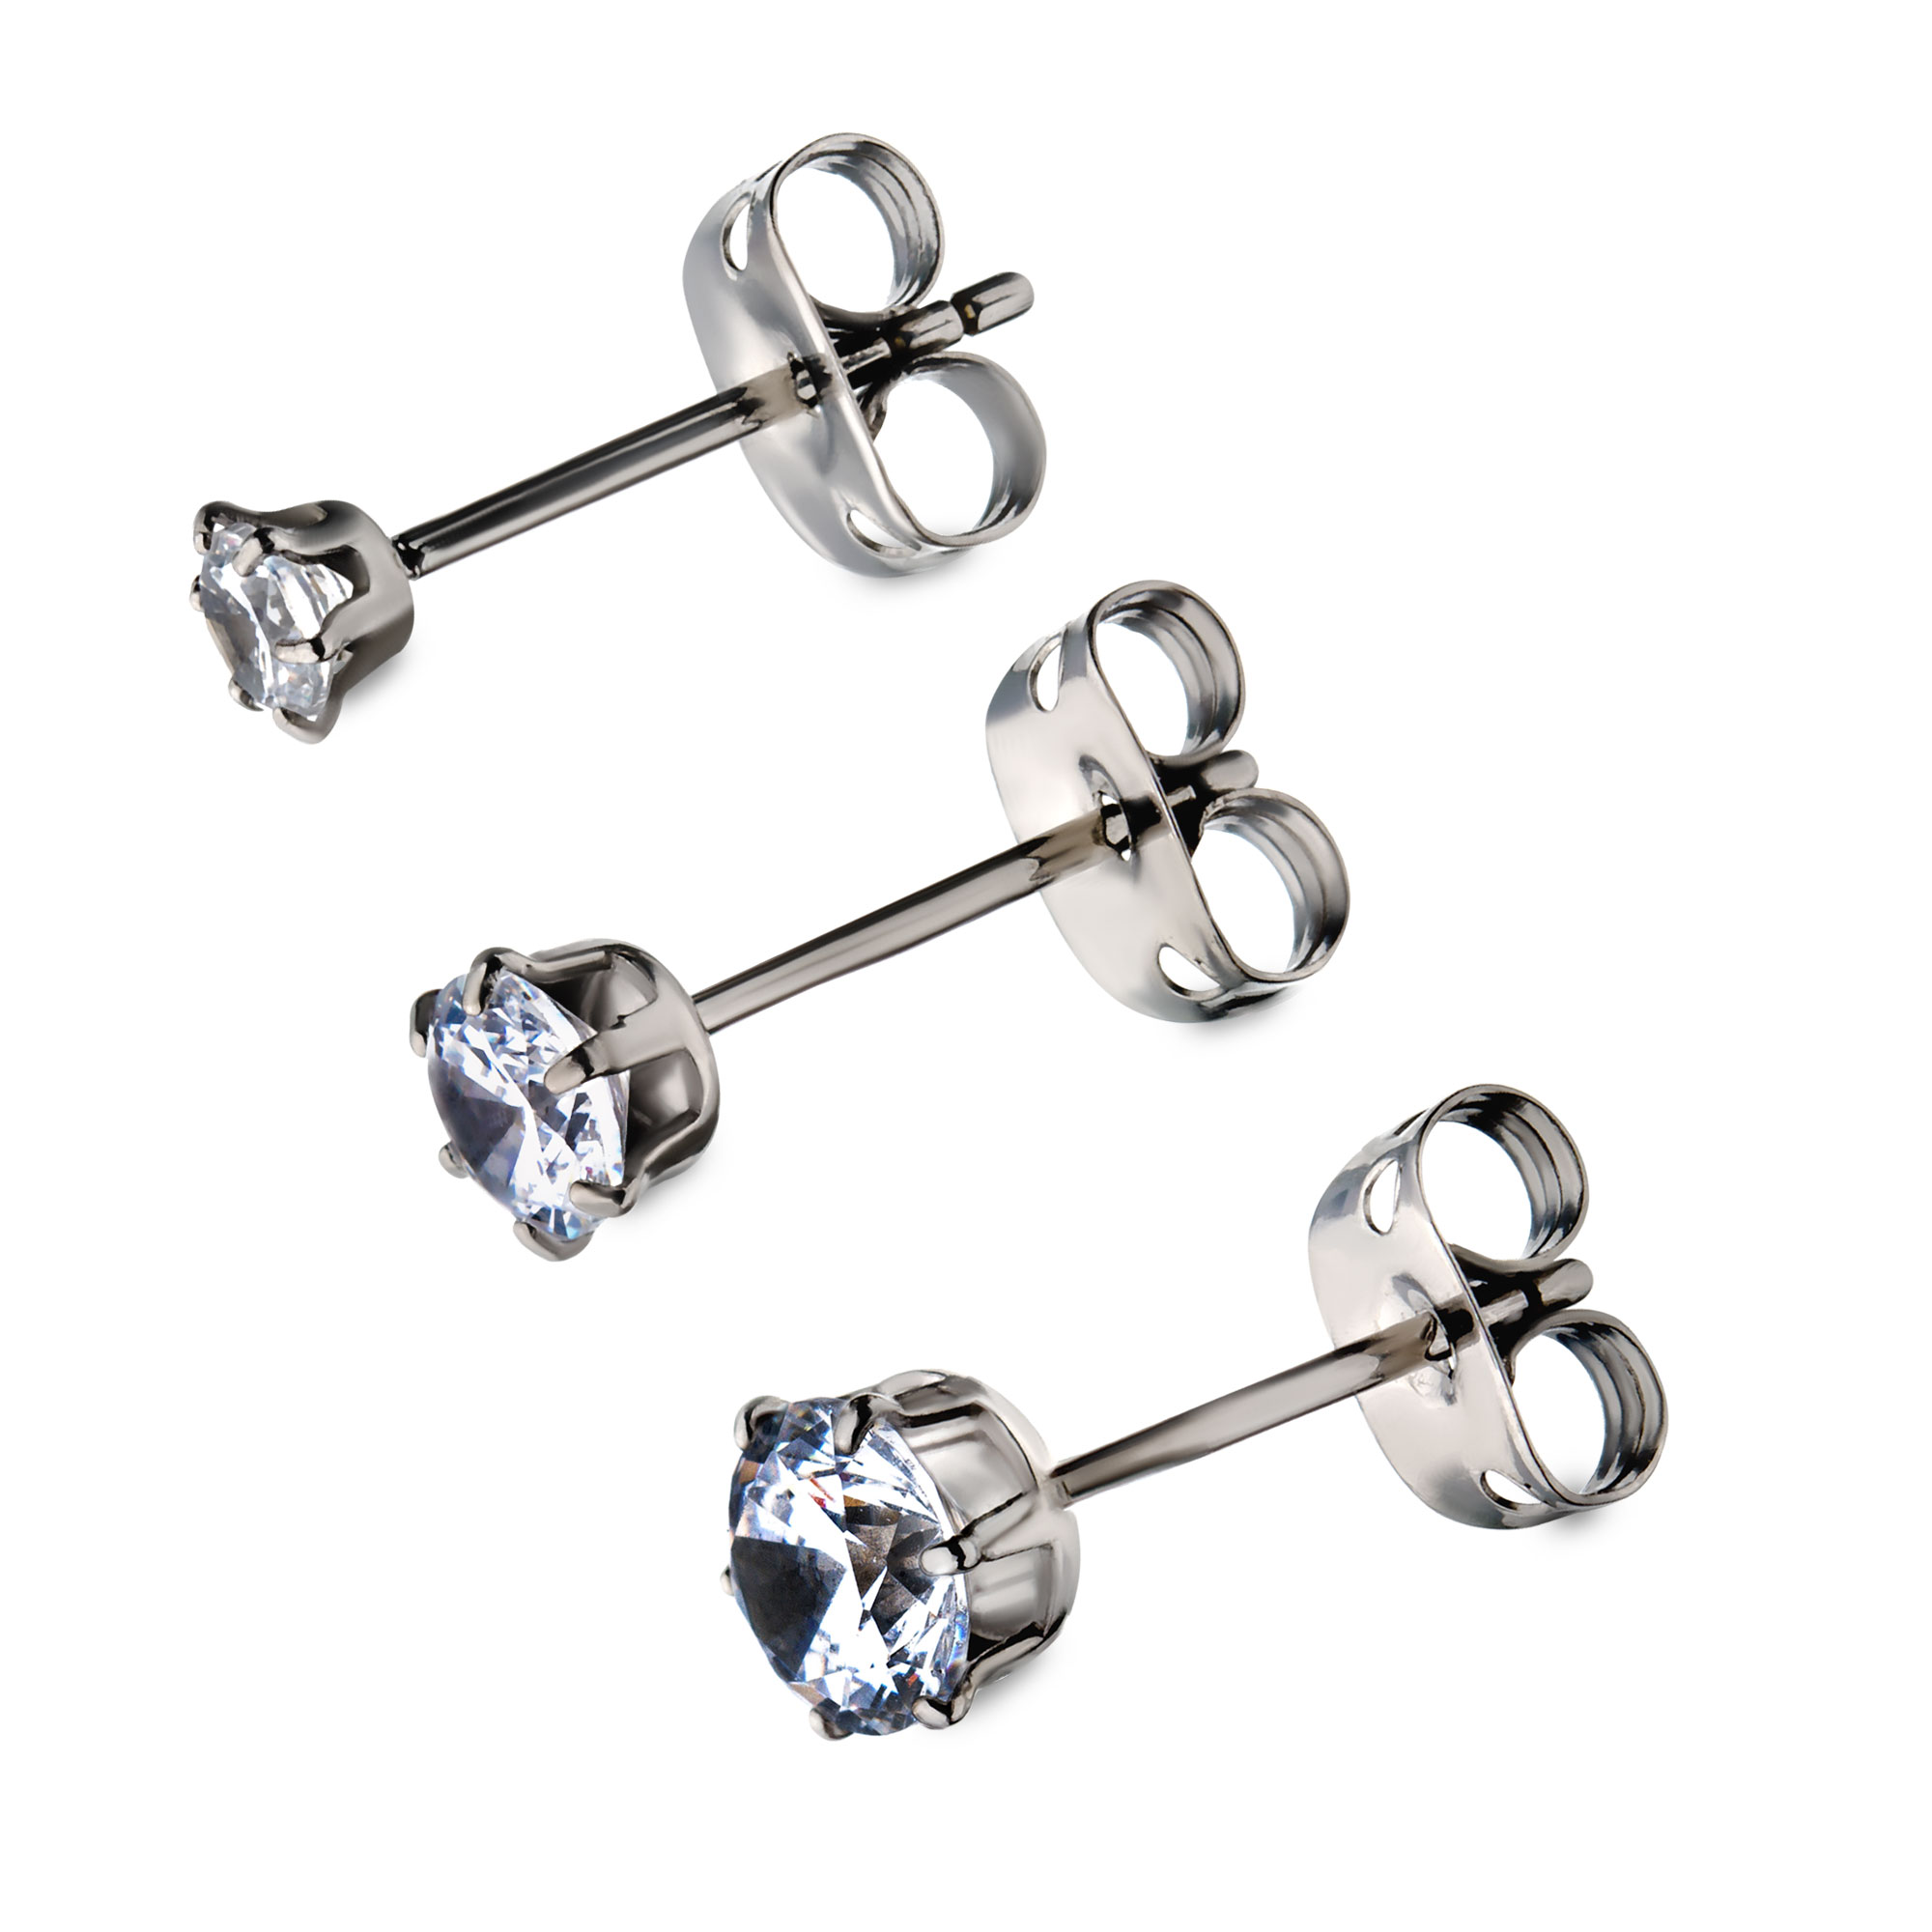 20g Titanium Post and Butterfly Back with Prong Set CZ Stud Earrings Image 2 Ritzi Jewelers Brookville, IN